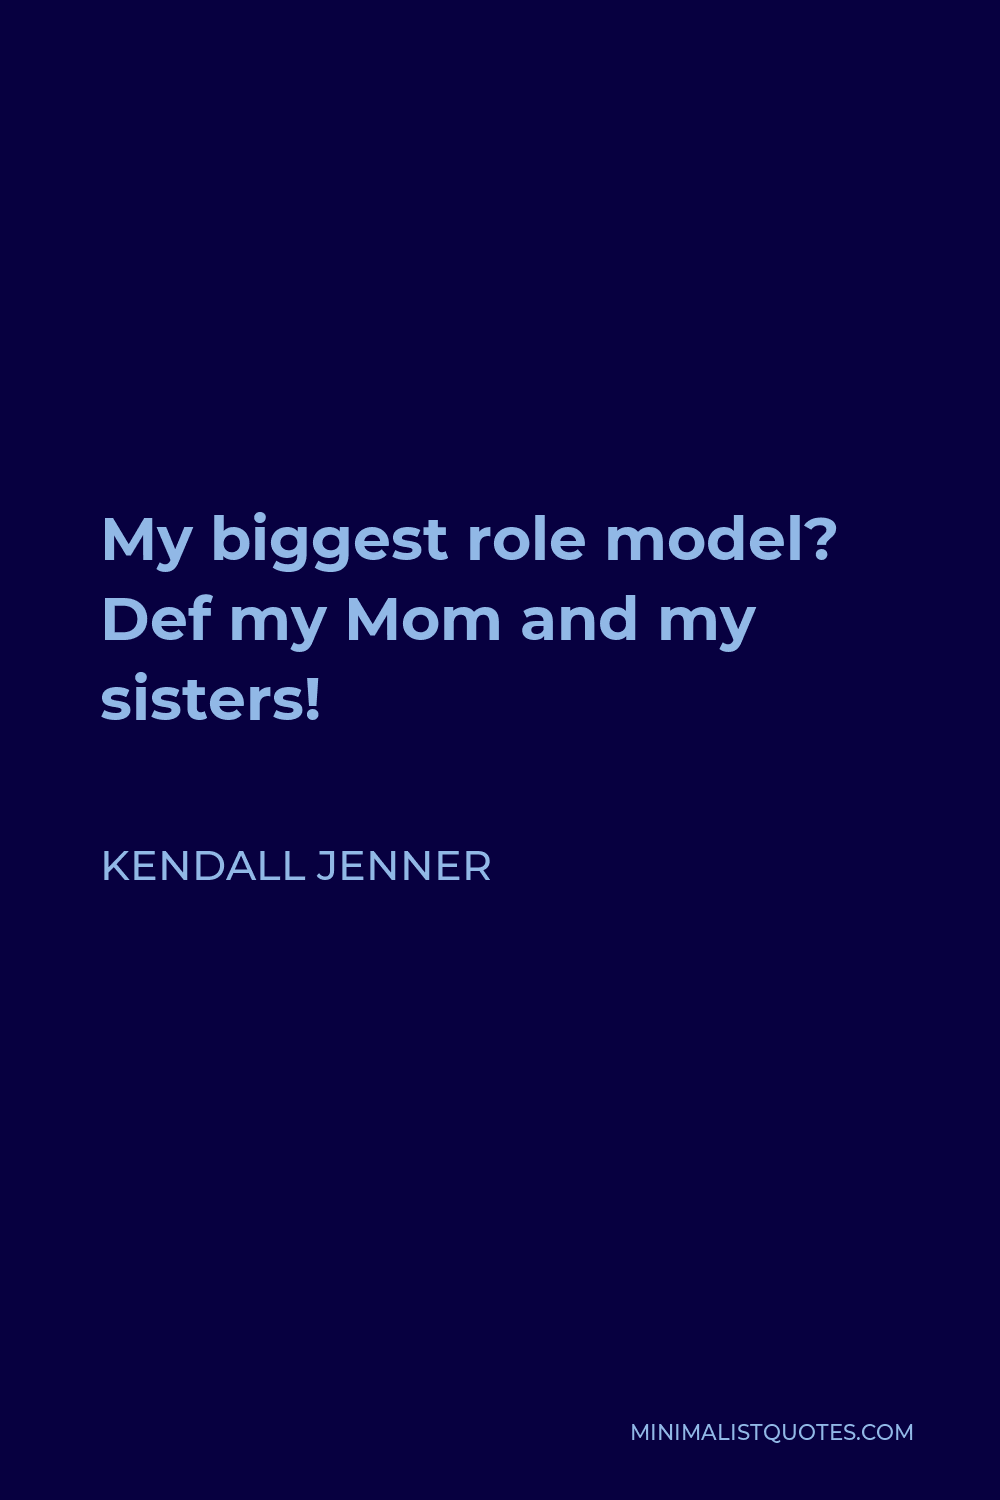 Kendall Jenner Quote - My biggest role model? Def my Mom and my sisters!